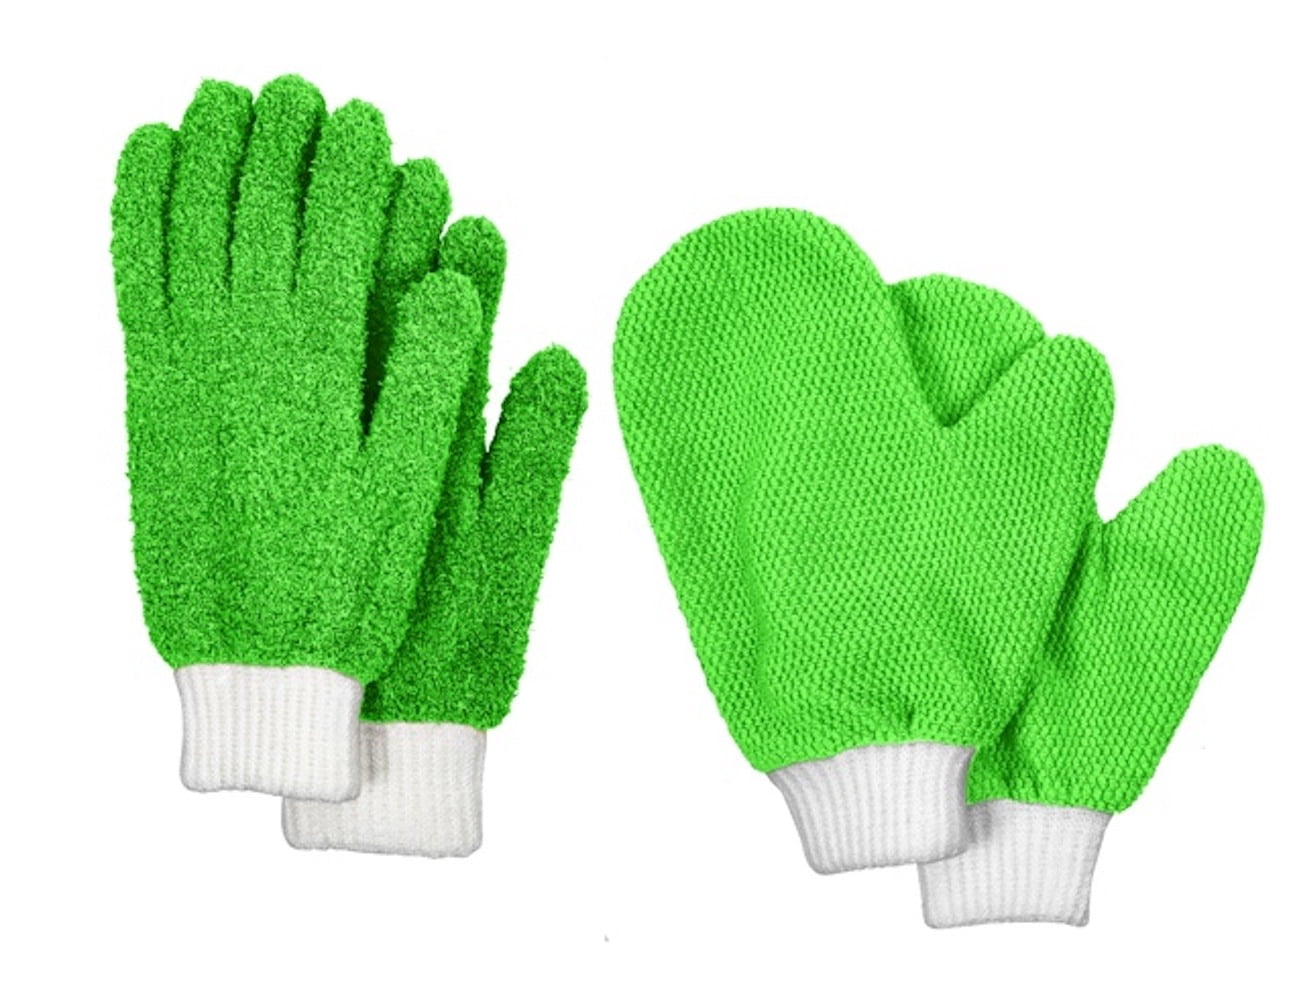 CleanGreen Microfiber Cleaning Gloves (Dusting Gloves) Reviewed